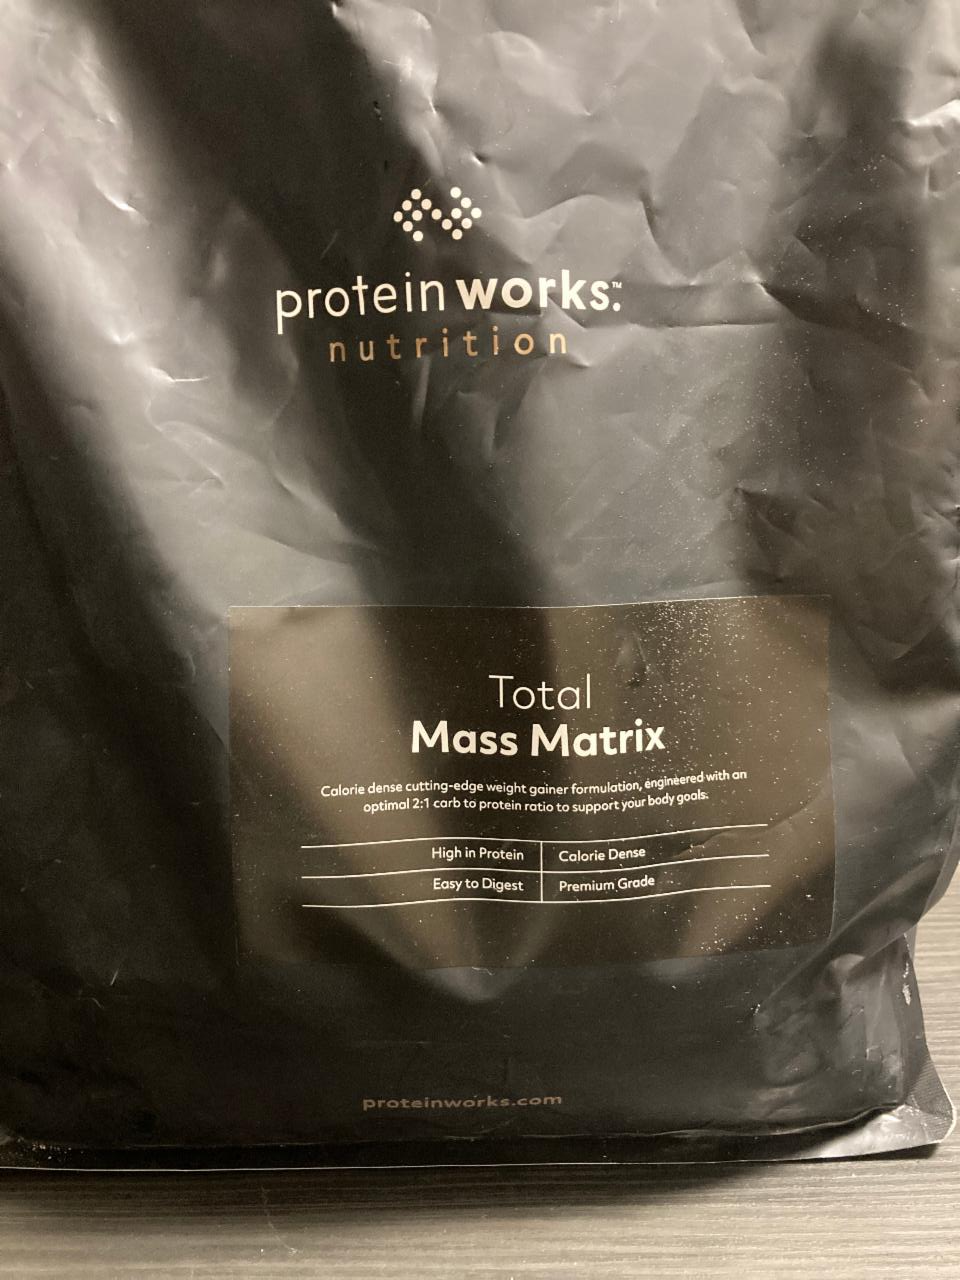 Total mass matrix - the protein works